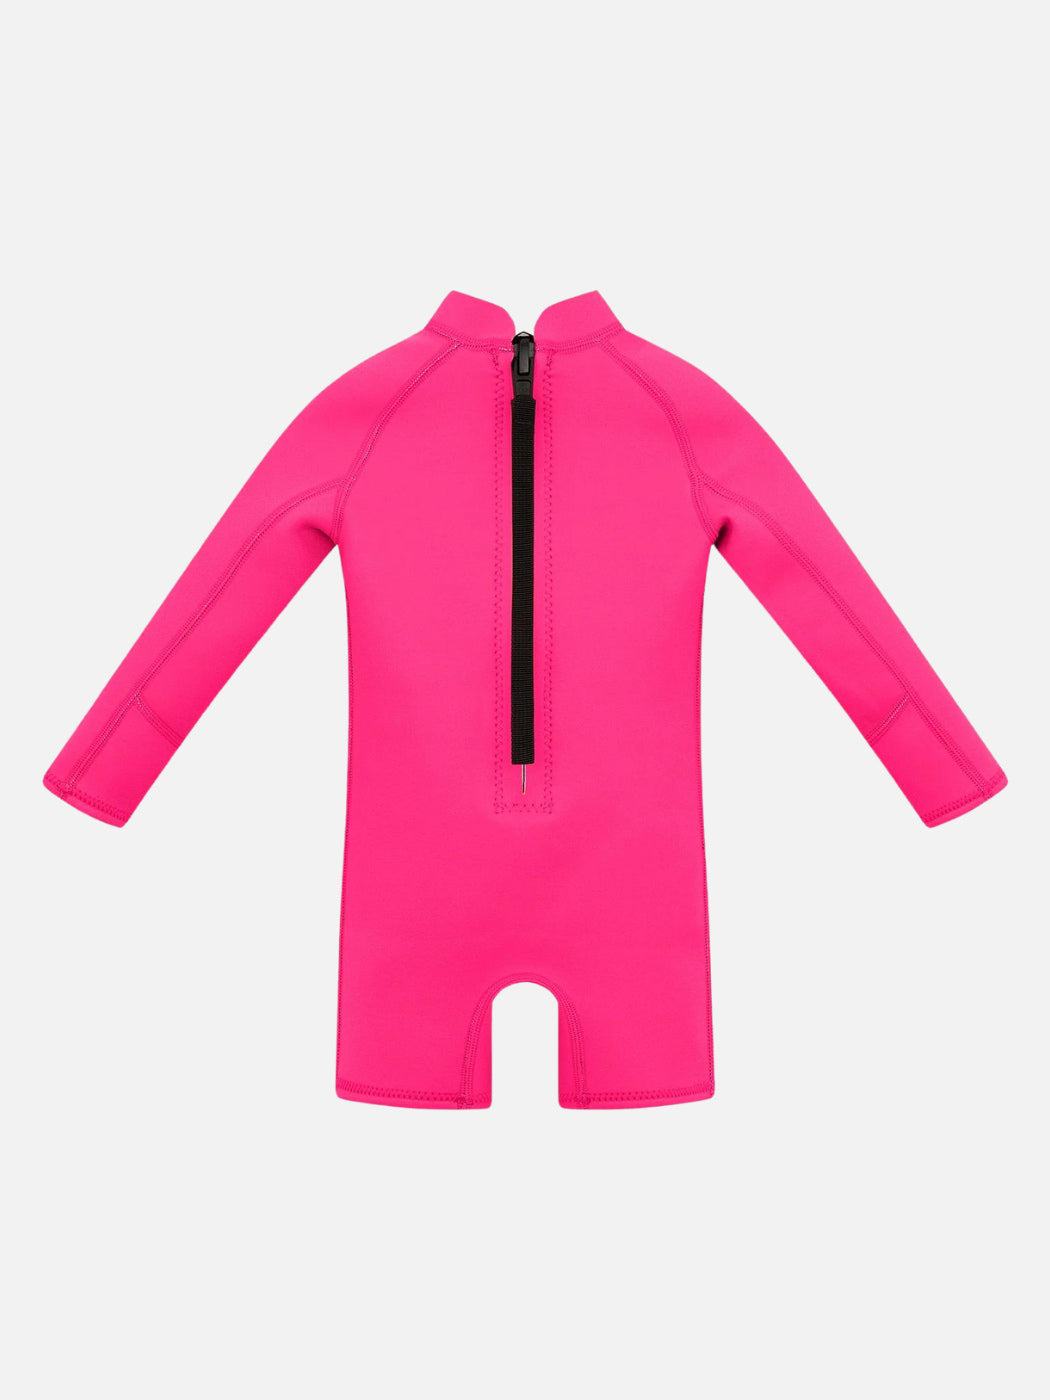 Springsuit Wetsuit - Candy Pink